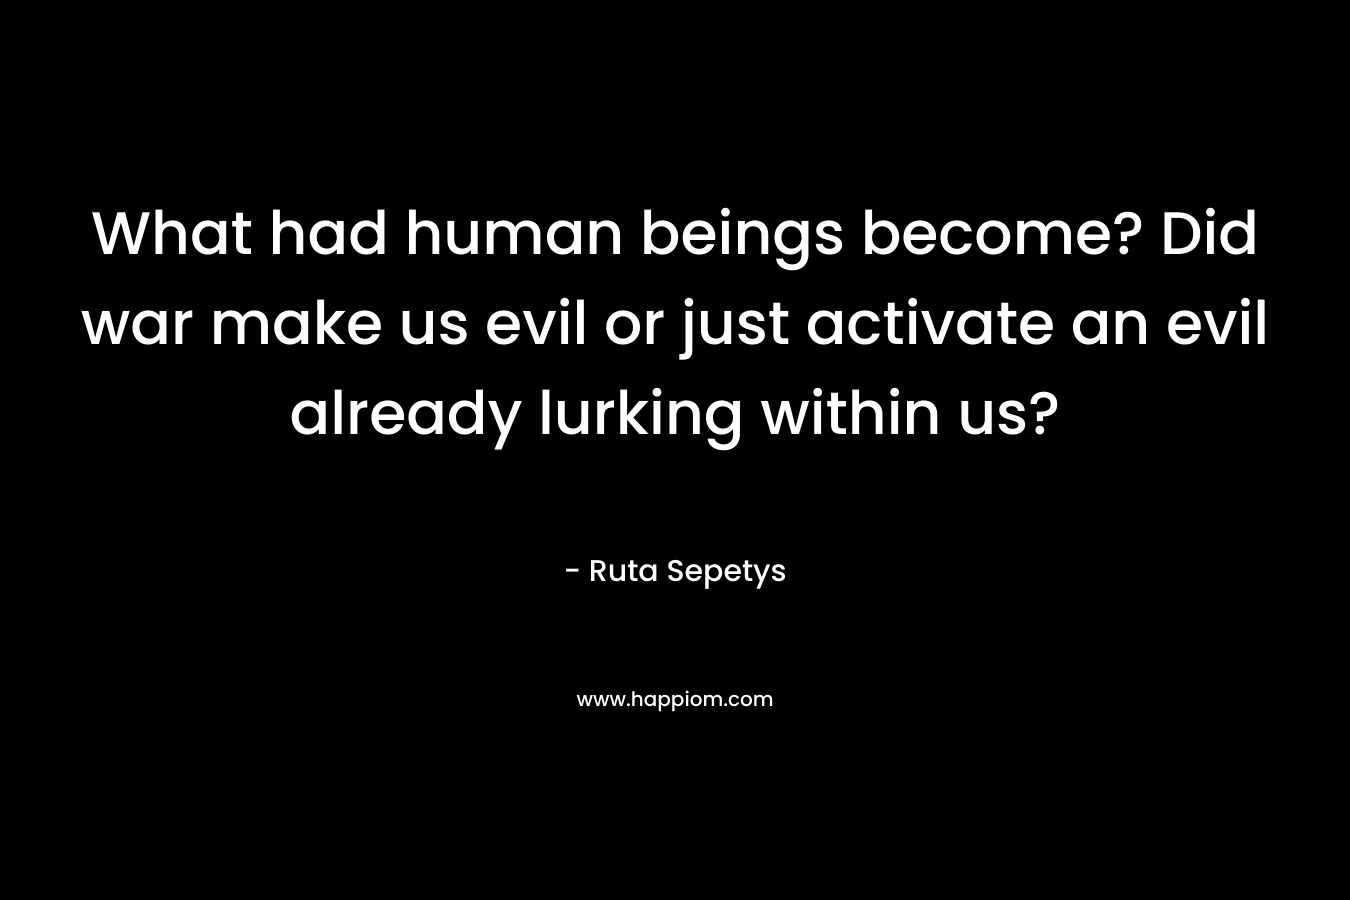 What had human beings become? Did war make us evil or just activate an evil already lurking within us? – Ruta Sepetys